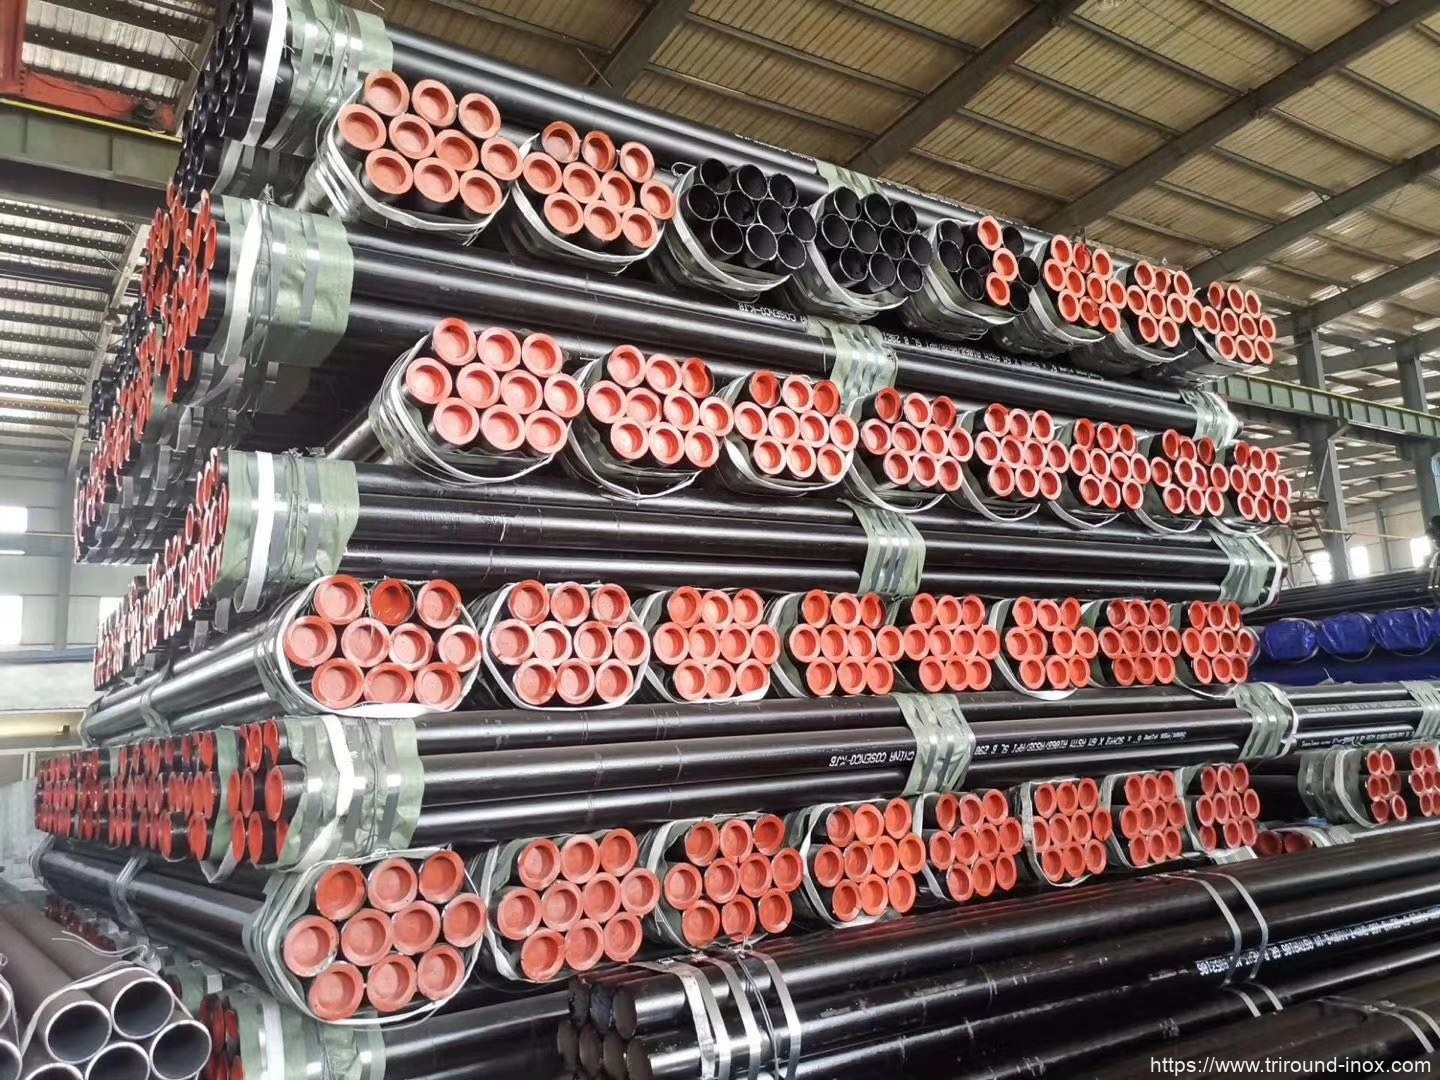 OEM/ODM Supplier Stainlesss Steel Sw Flange -
 API 5CT K55 Casing Tubing Suppliers, K55 Oil And Gas Api Casing Pipe Exporters – Triround